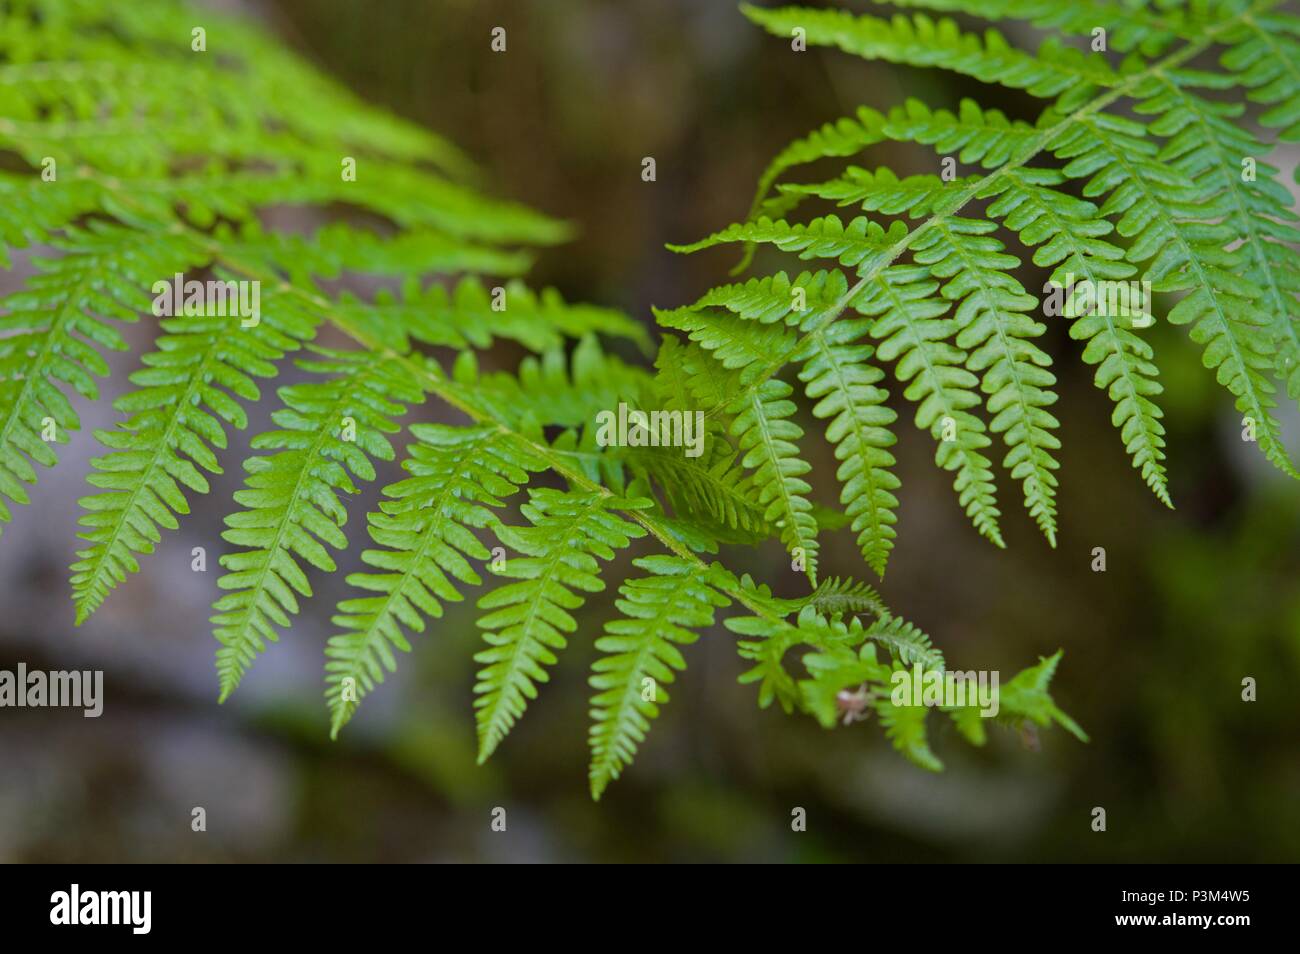 Groups of ferns Pterophyta class Stock Photo